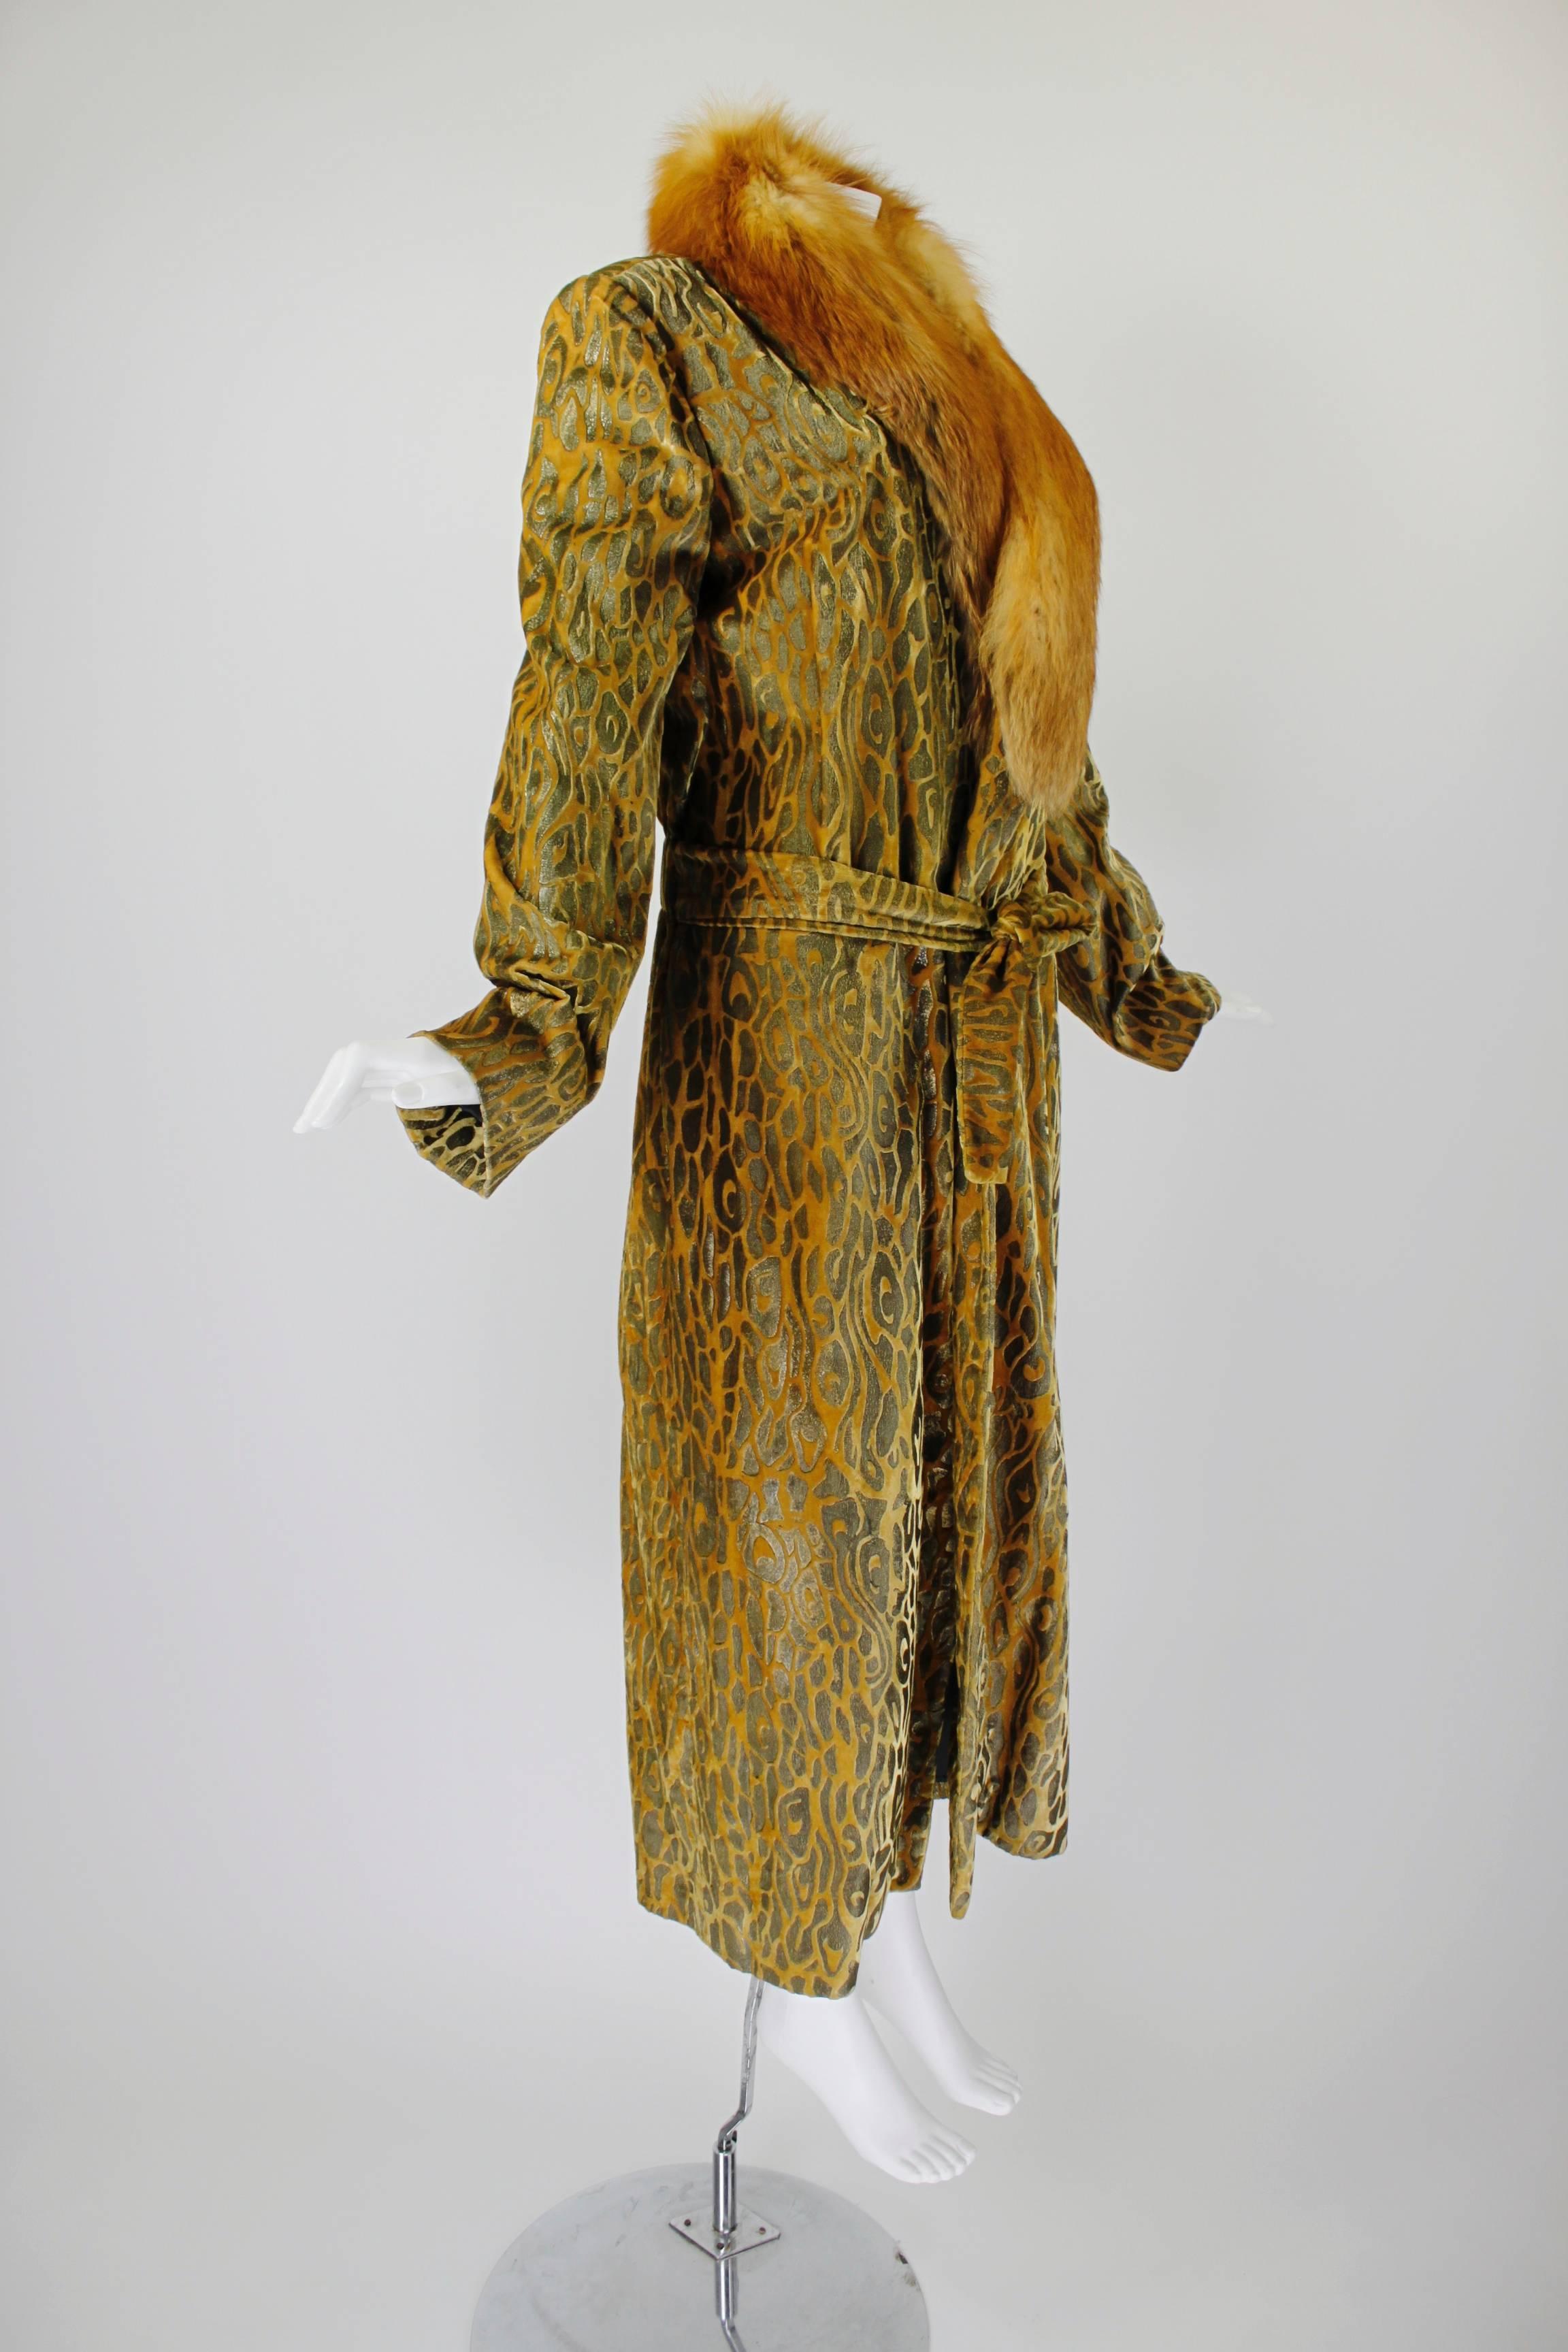 This fabulous Bill Blass opera coat is done in a gorgeous marigold paisley velvet with blonde fox fur trim. The drop waist is gathered/elasticized and features an attached belt.

-Fully lined
-Tie-belt closure
-Fur is